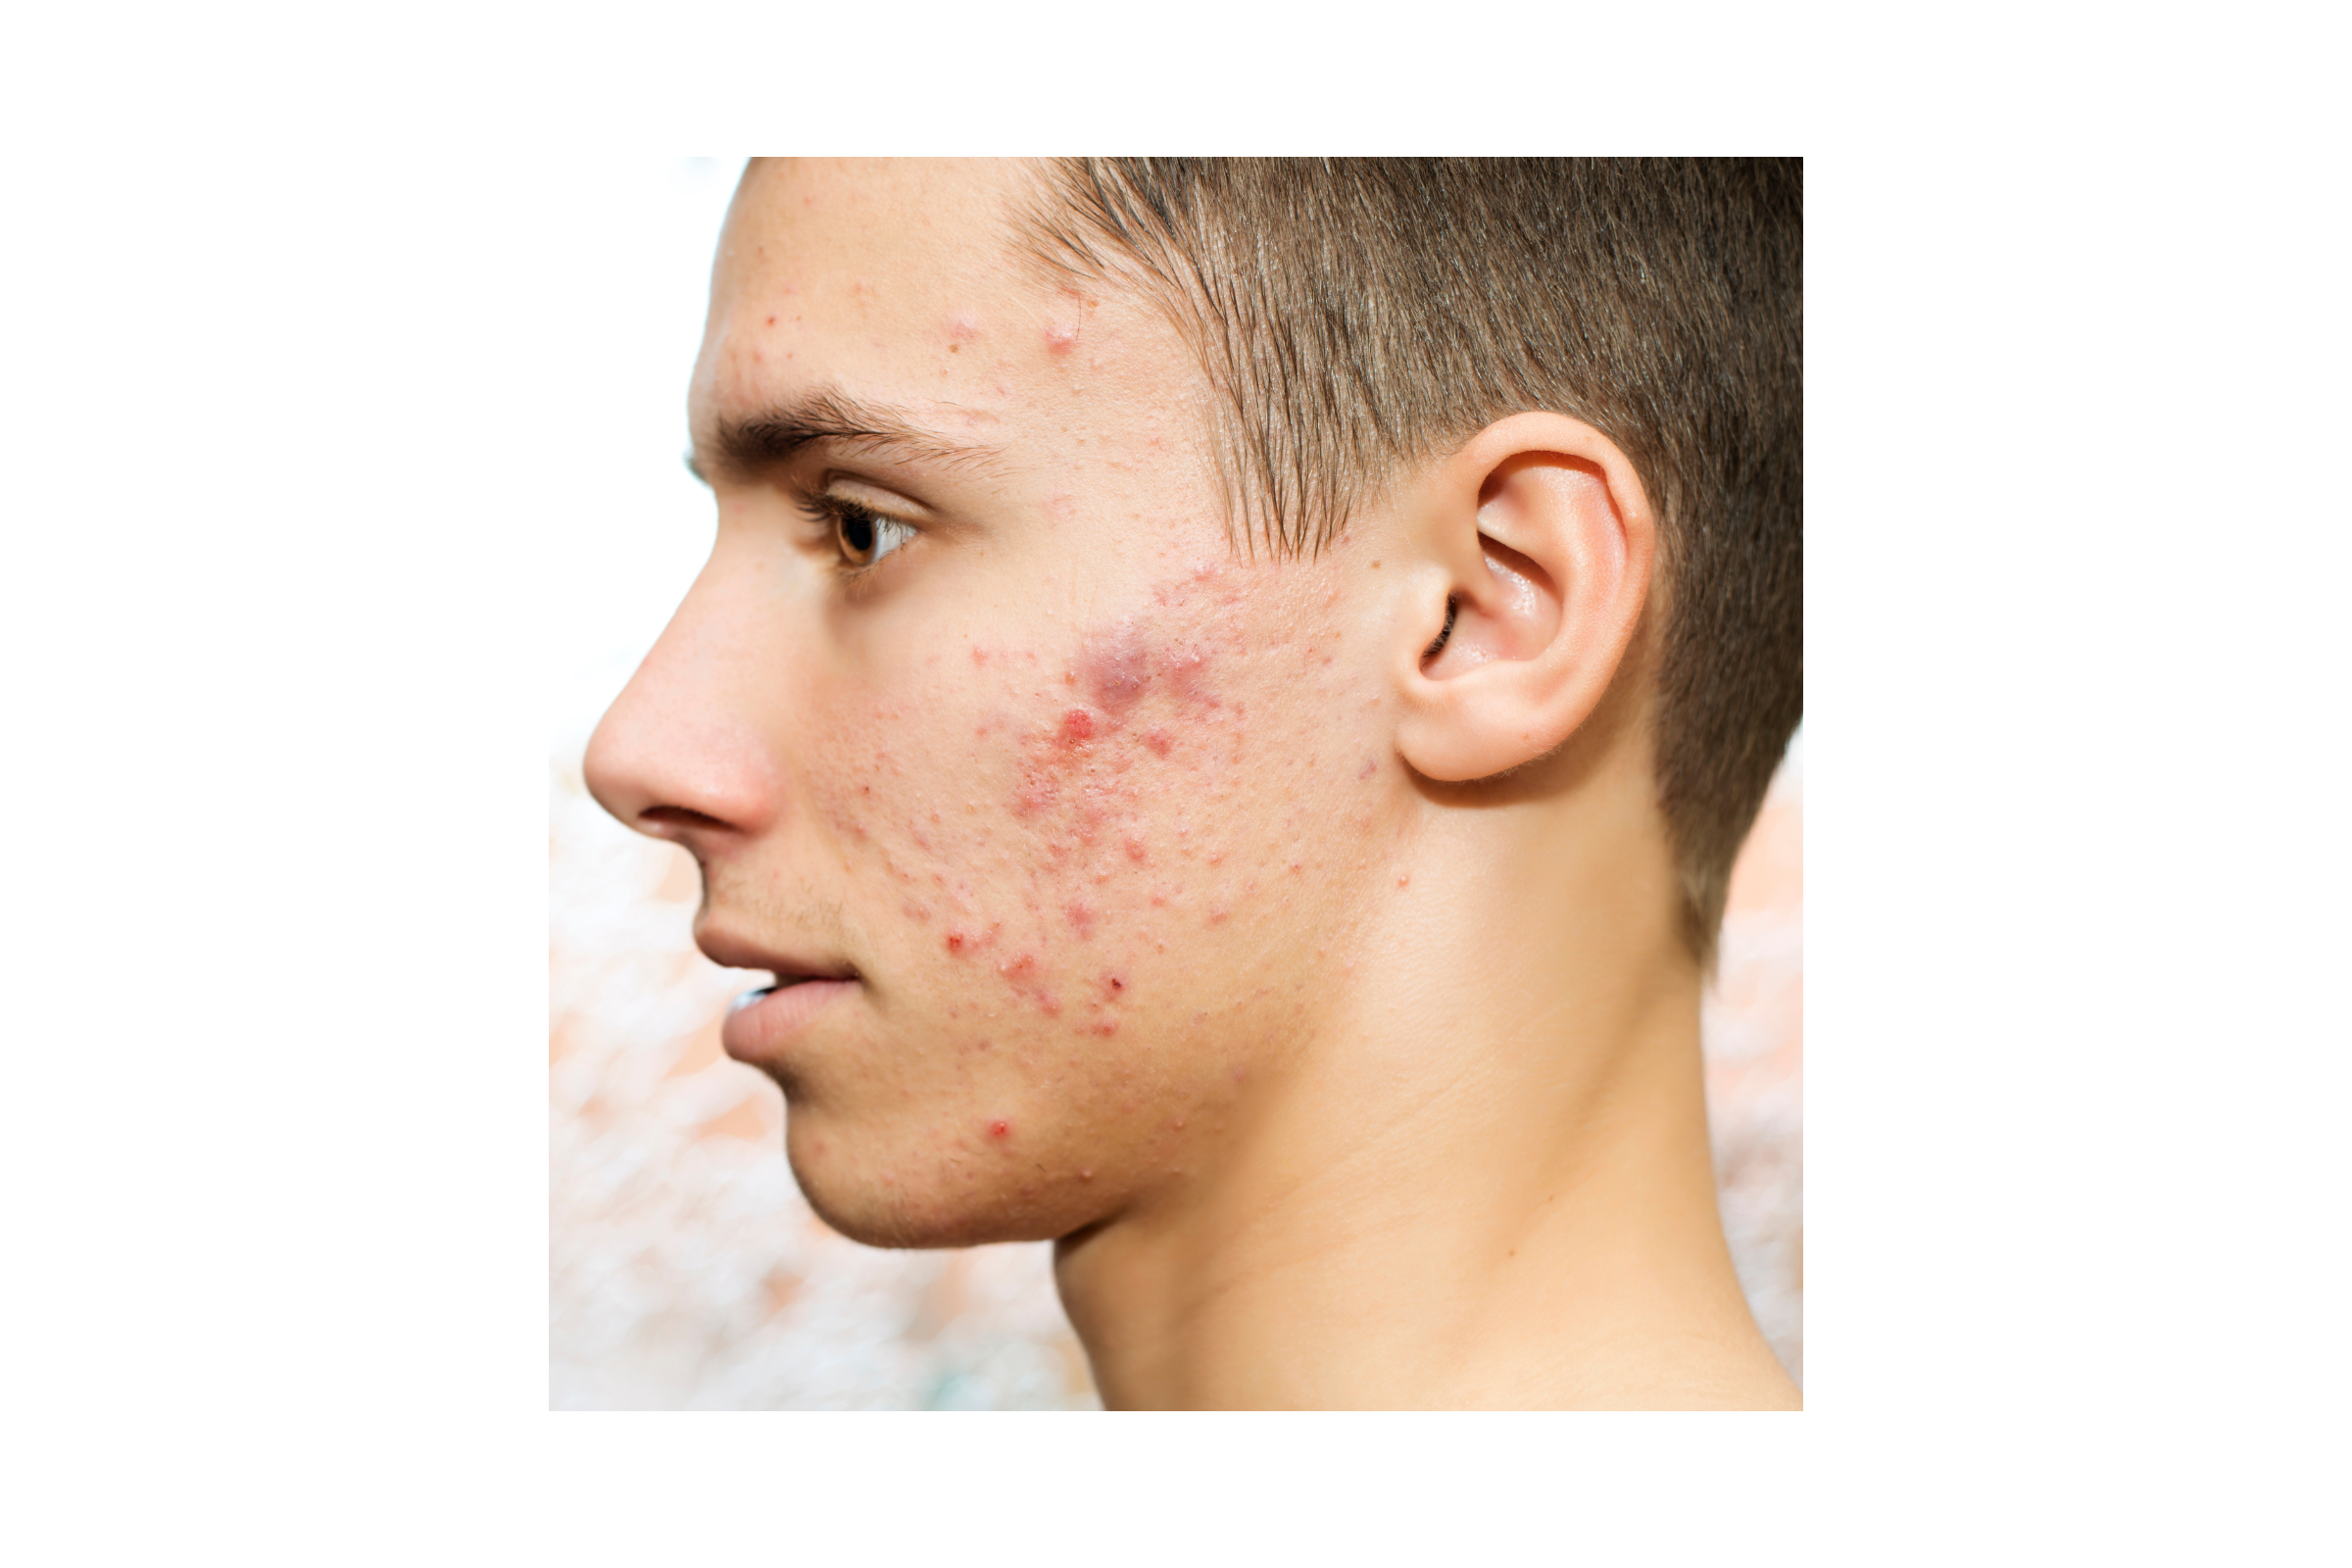 Can aftershave help treat acne?